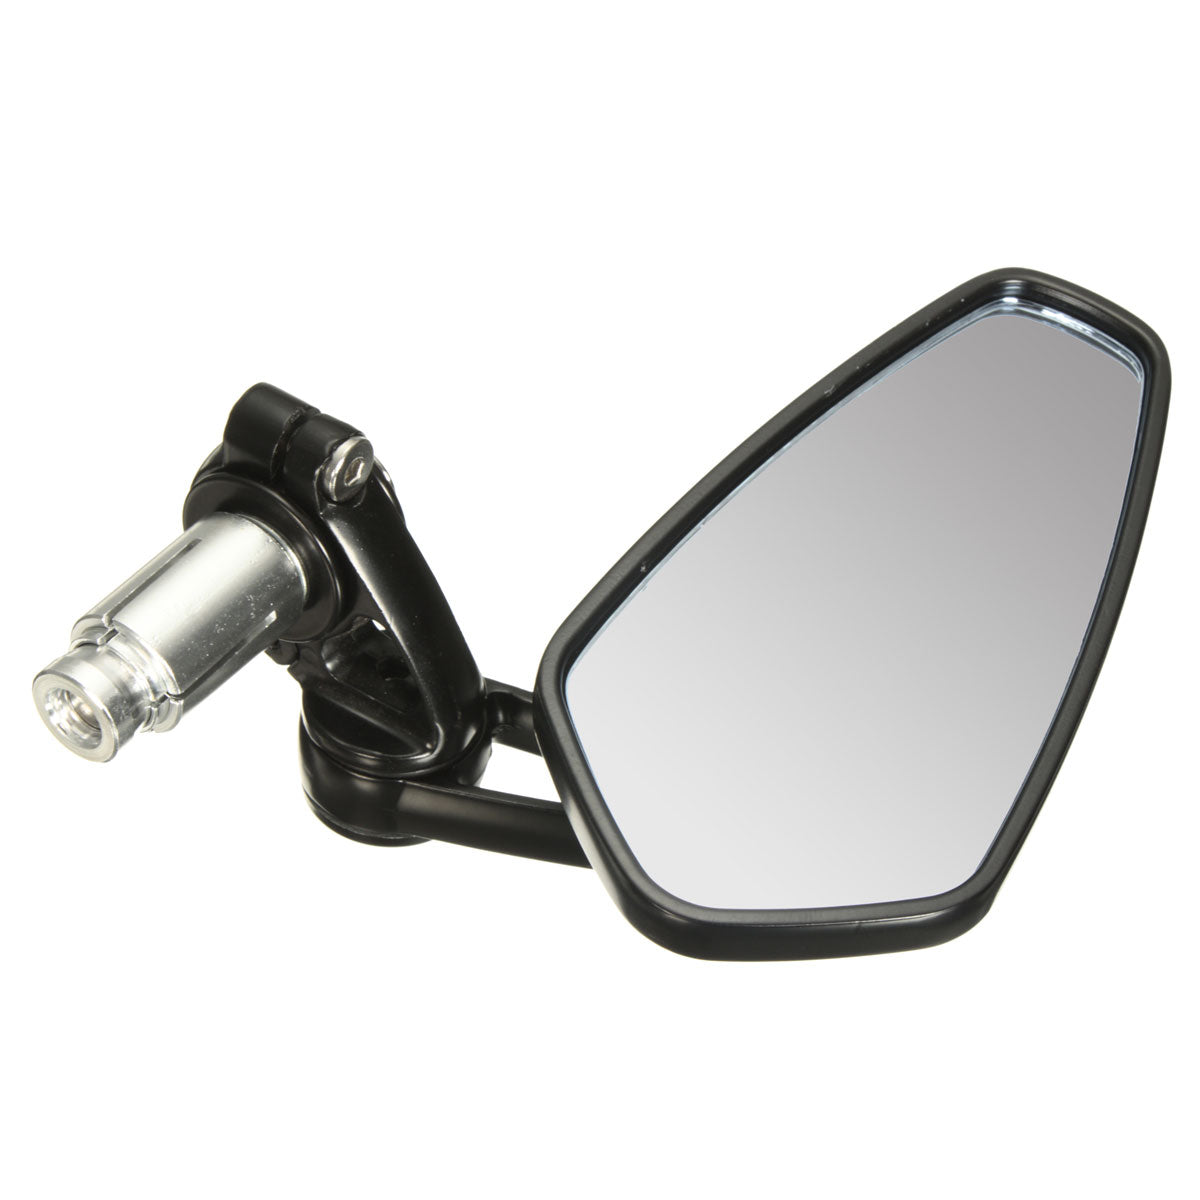 Lavender 7/8inch 22mm Handlebar End Side Rear View Mirrors Motorcycle Universal Aluminum